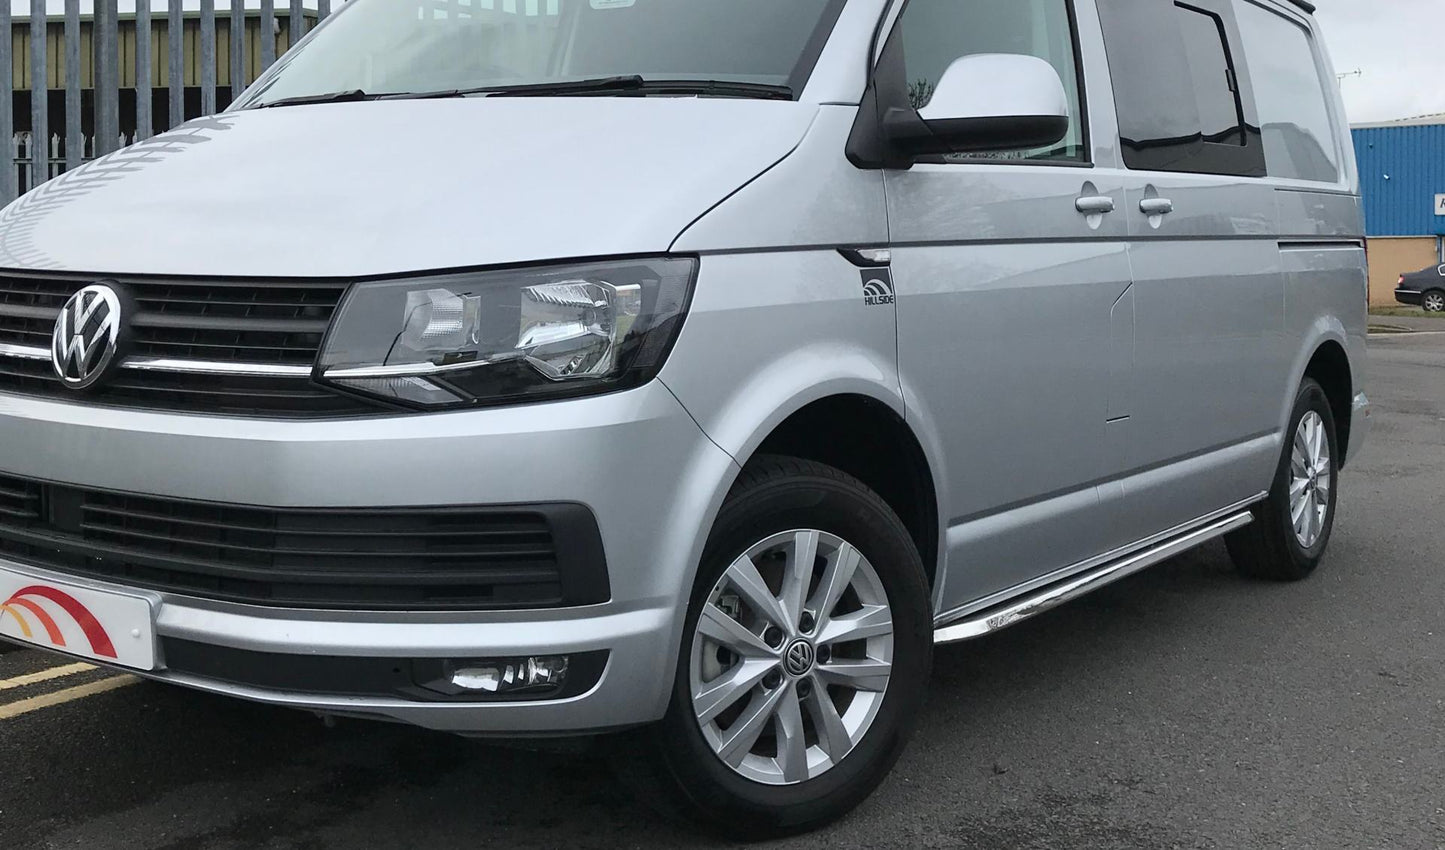 Stainless Steel Angular OE Style Side Bars for Volkswagen Transporter T6 SWB -  - sold by Direct4x4